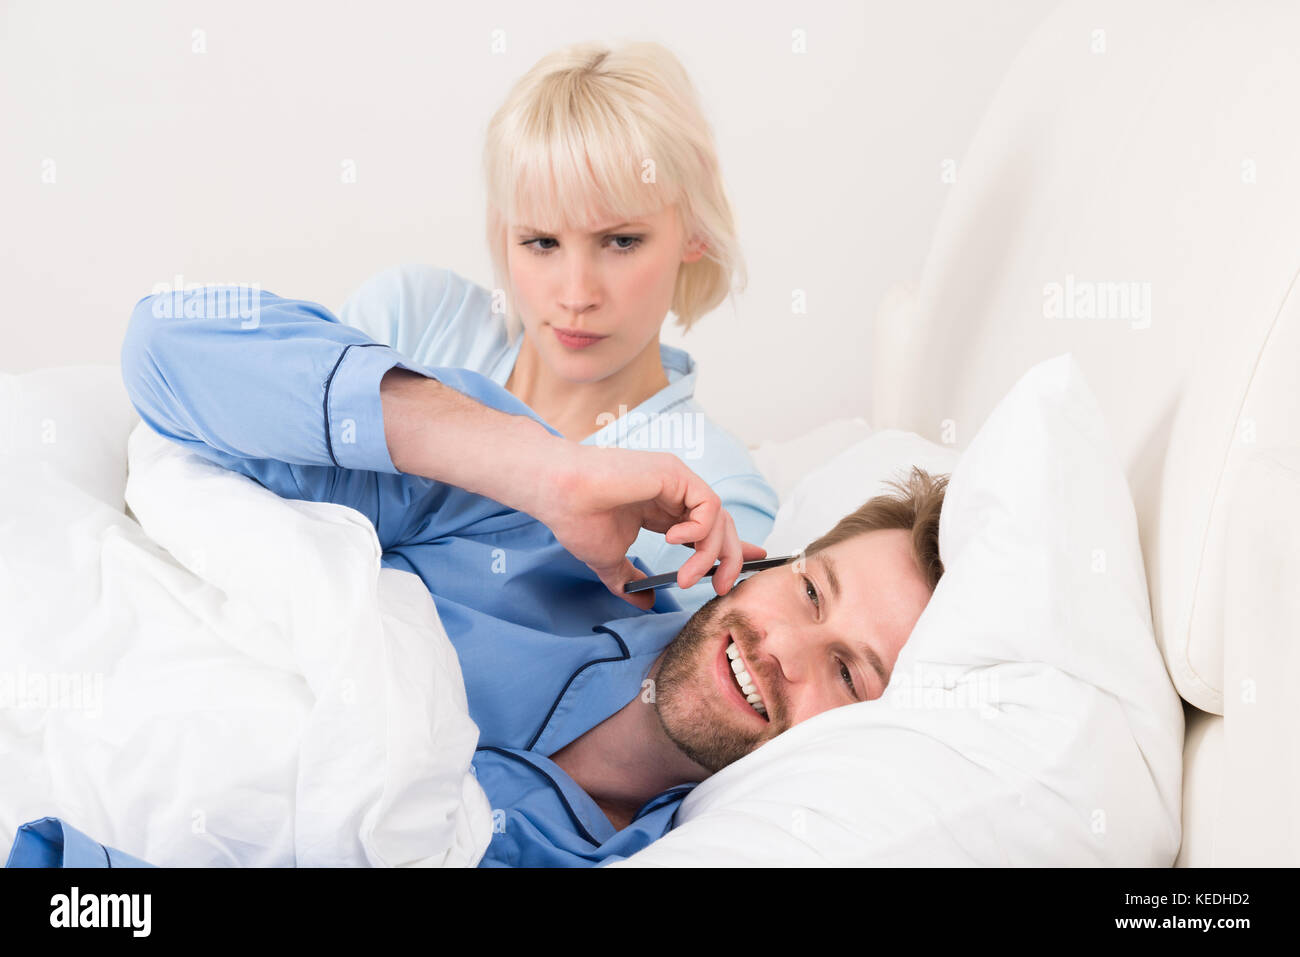 Woman Looking At Man Talking On Mobile Phone In Bedroom Stock Photo